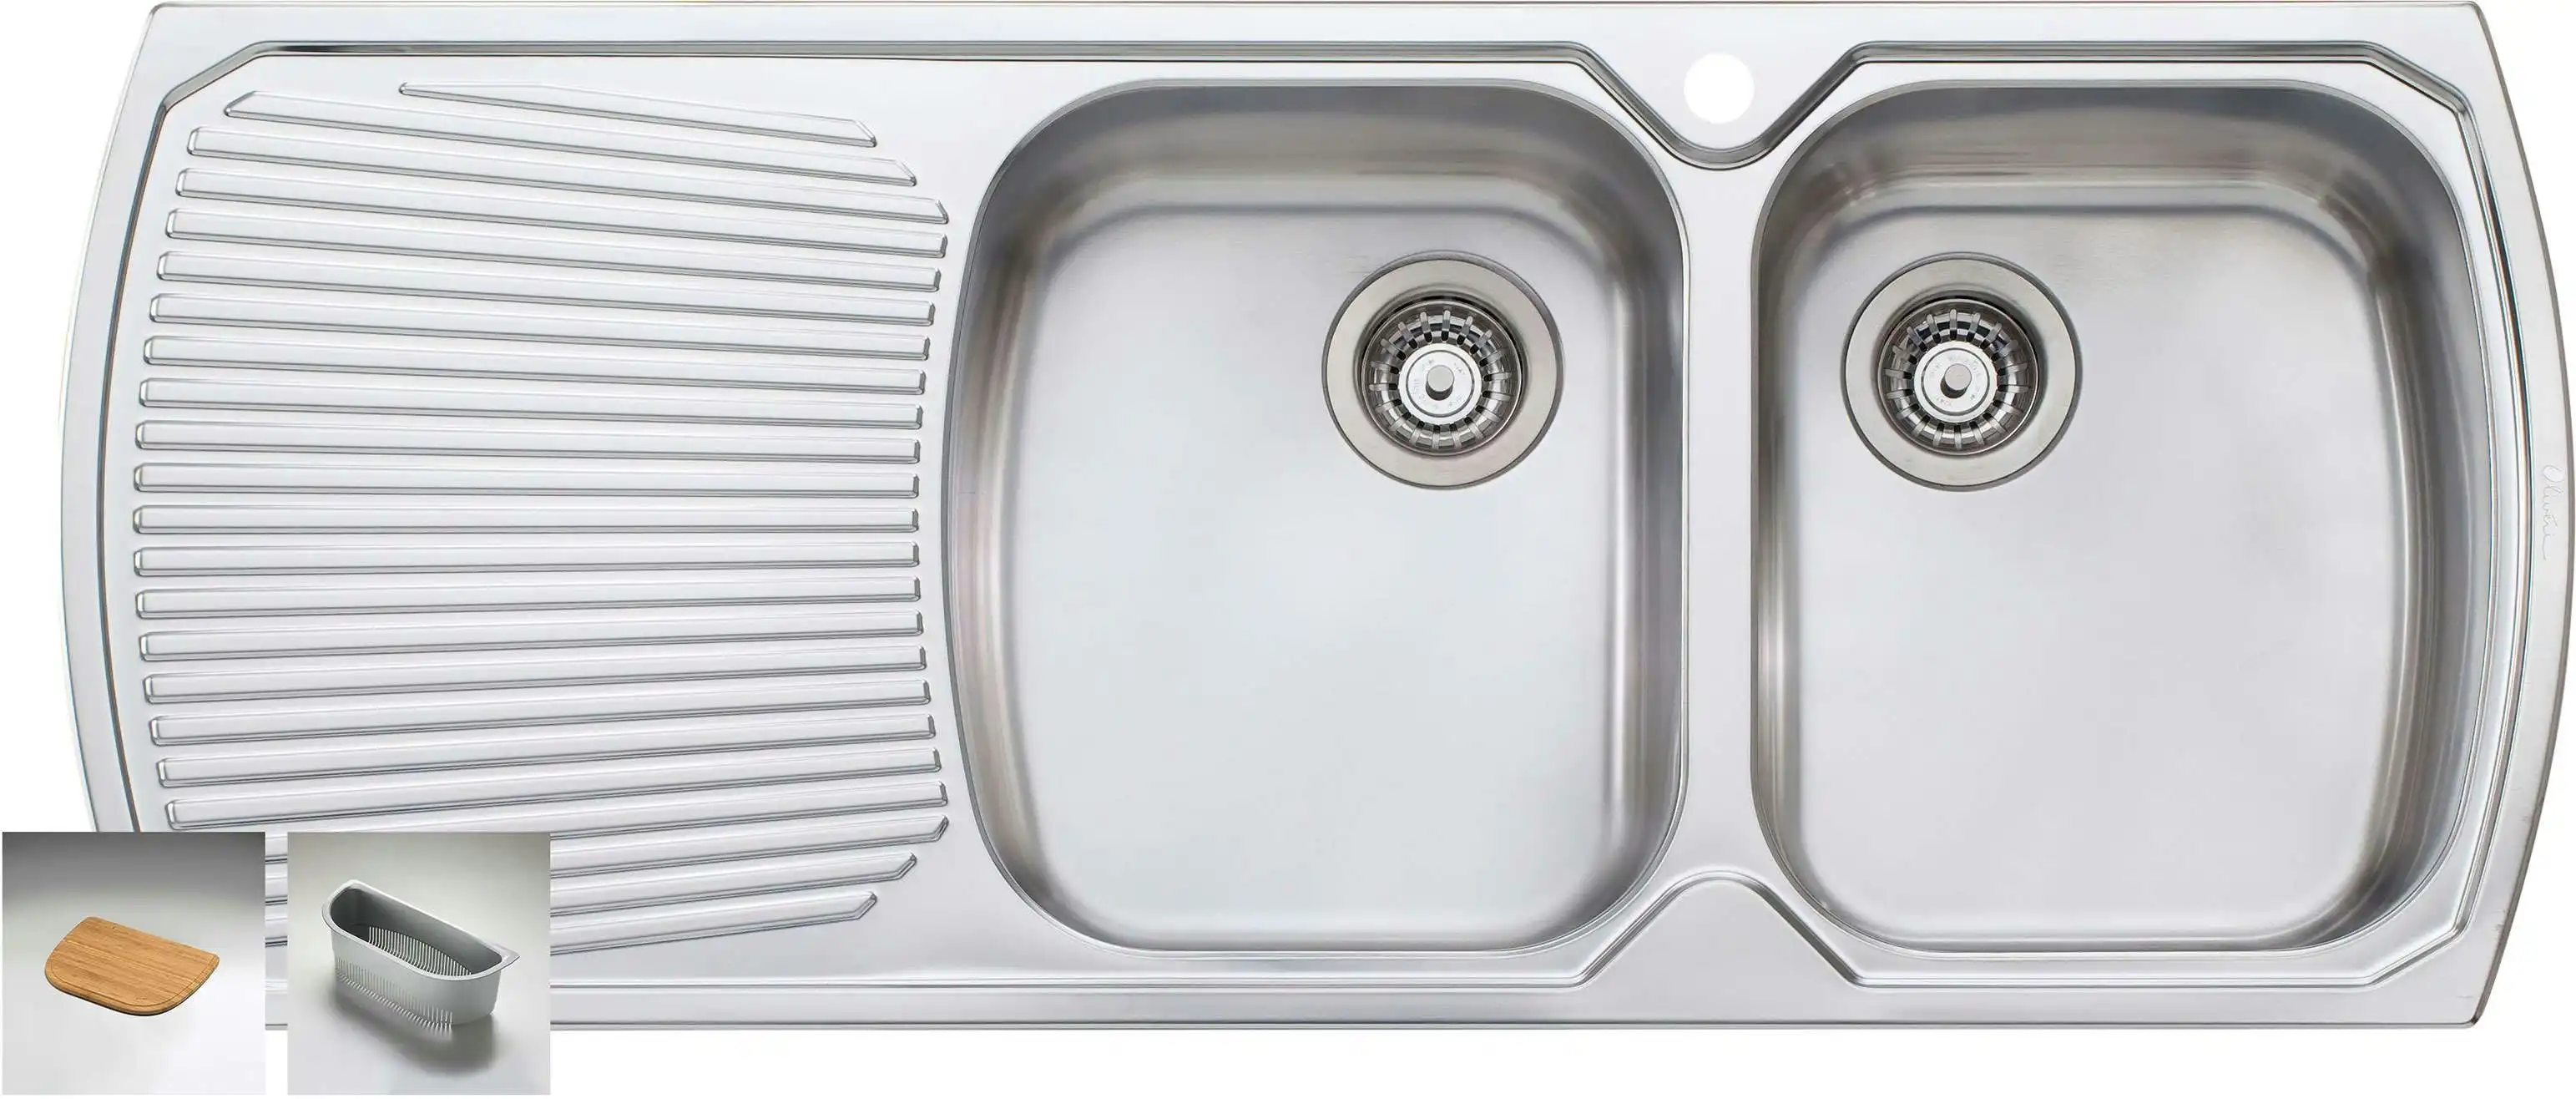 Oliveri Monet Double Right Hand Bowl Inset Sink With Drainer MO772